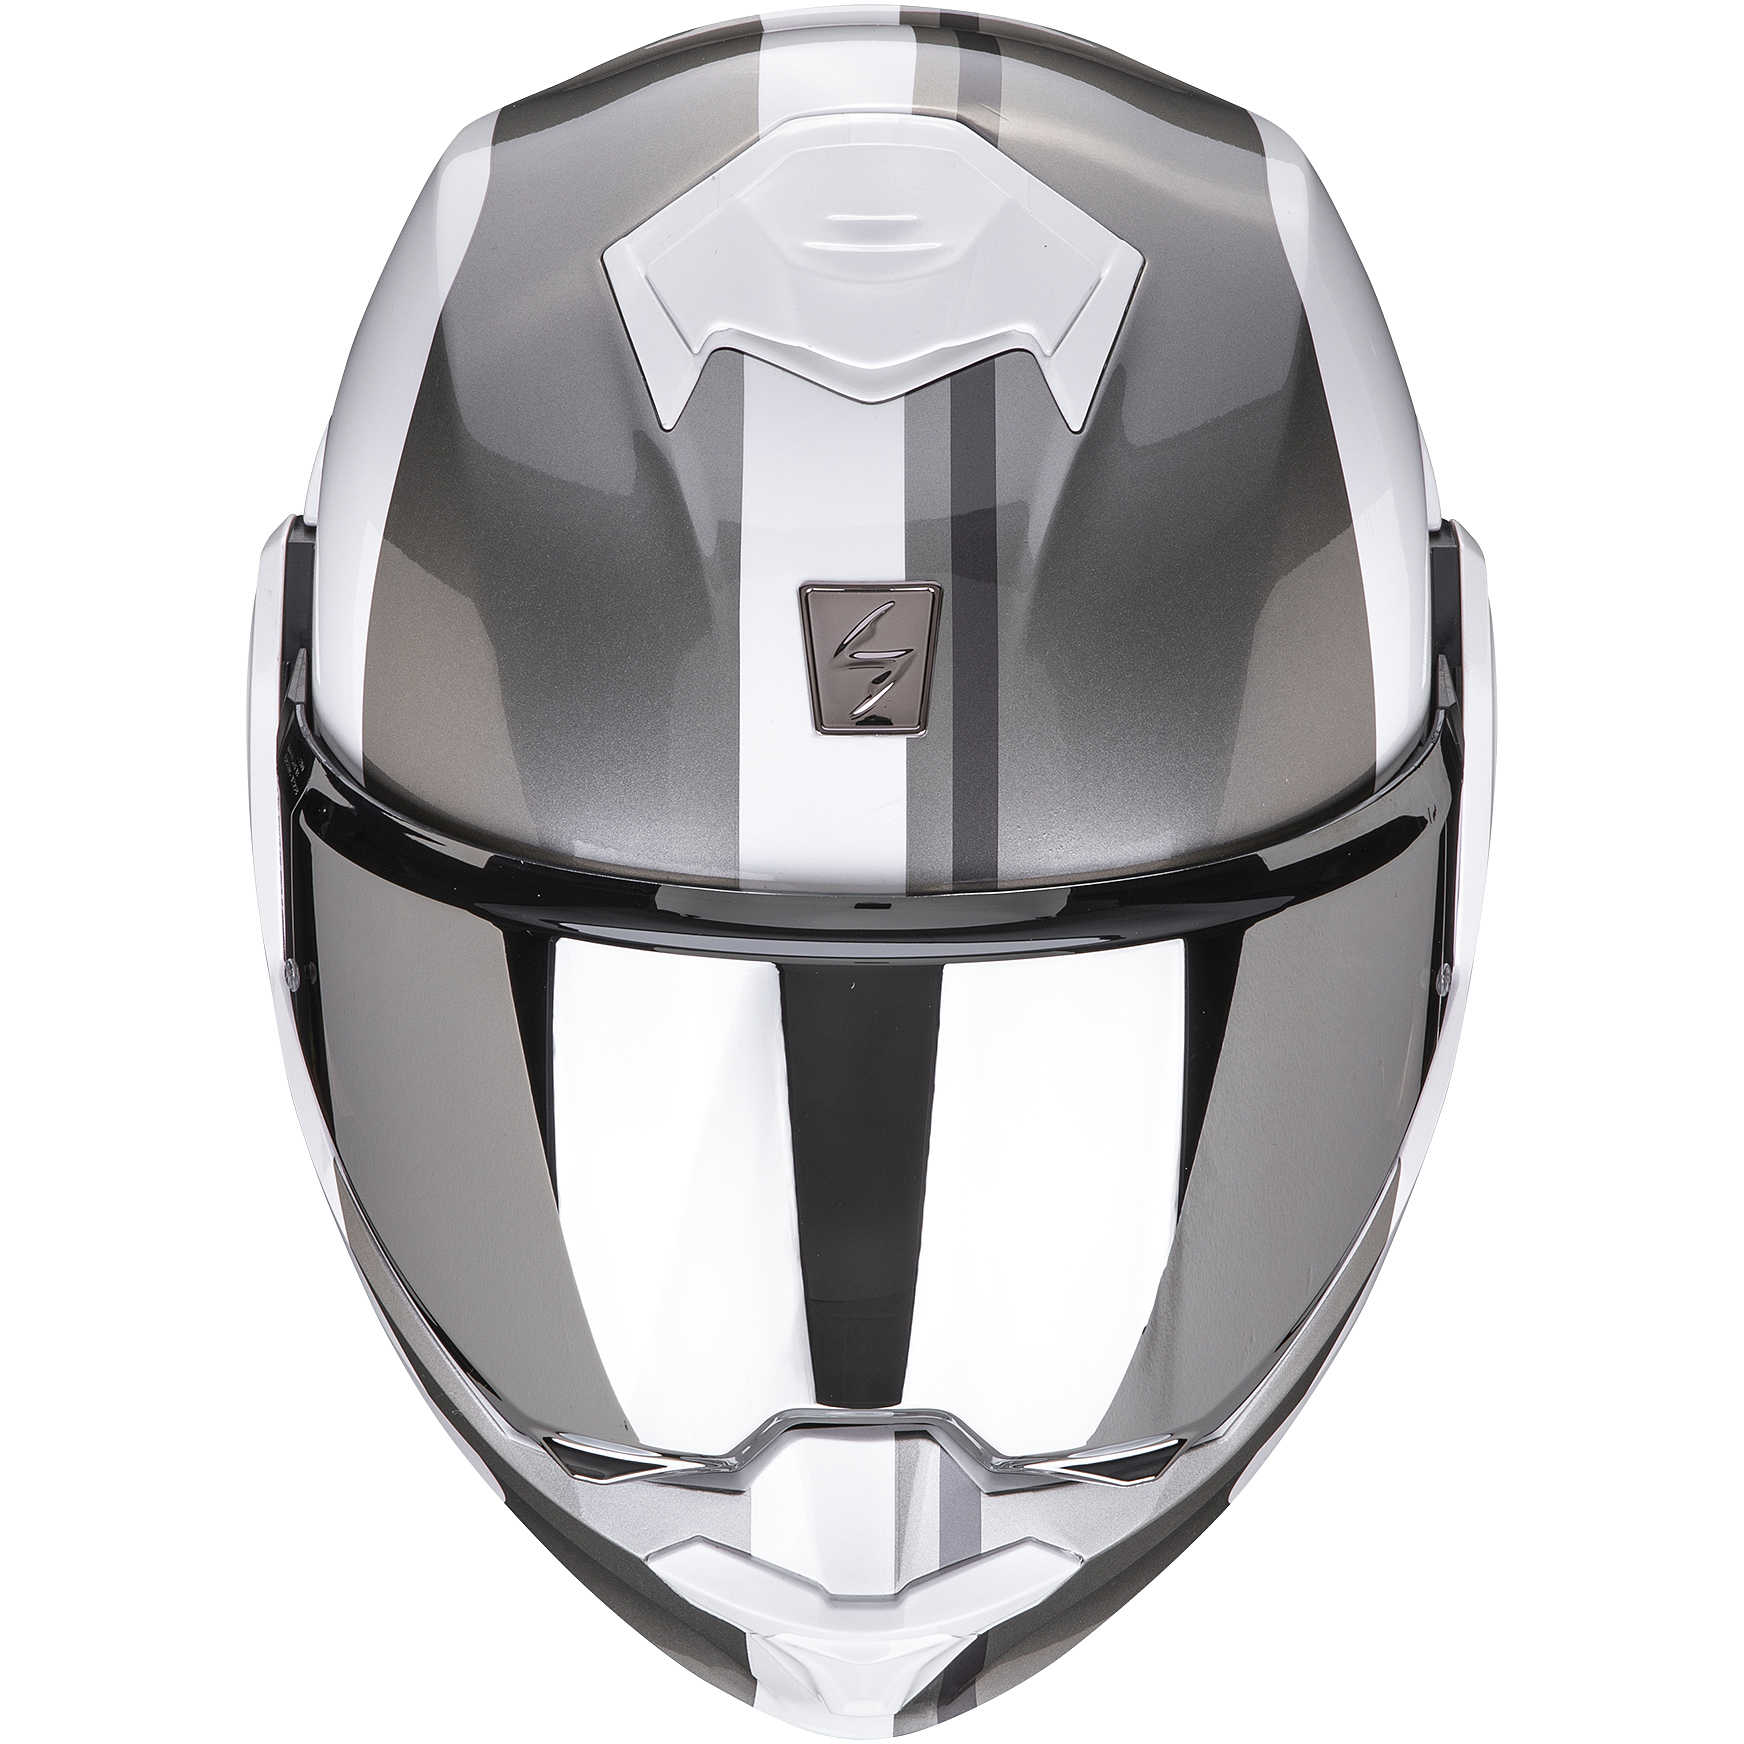 Modular Motorcycle Helmet Scorpion EXO-TECH FORZA White Pearl Silver For  Sale Online 